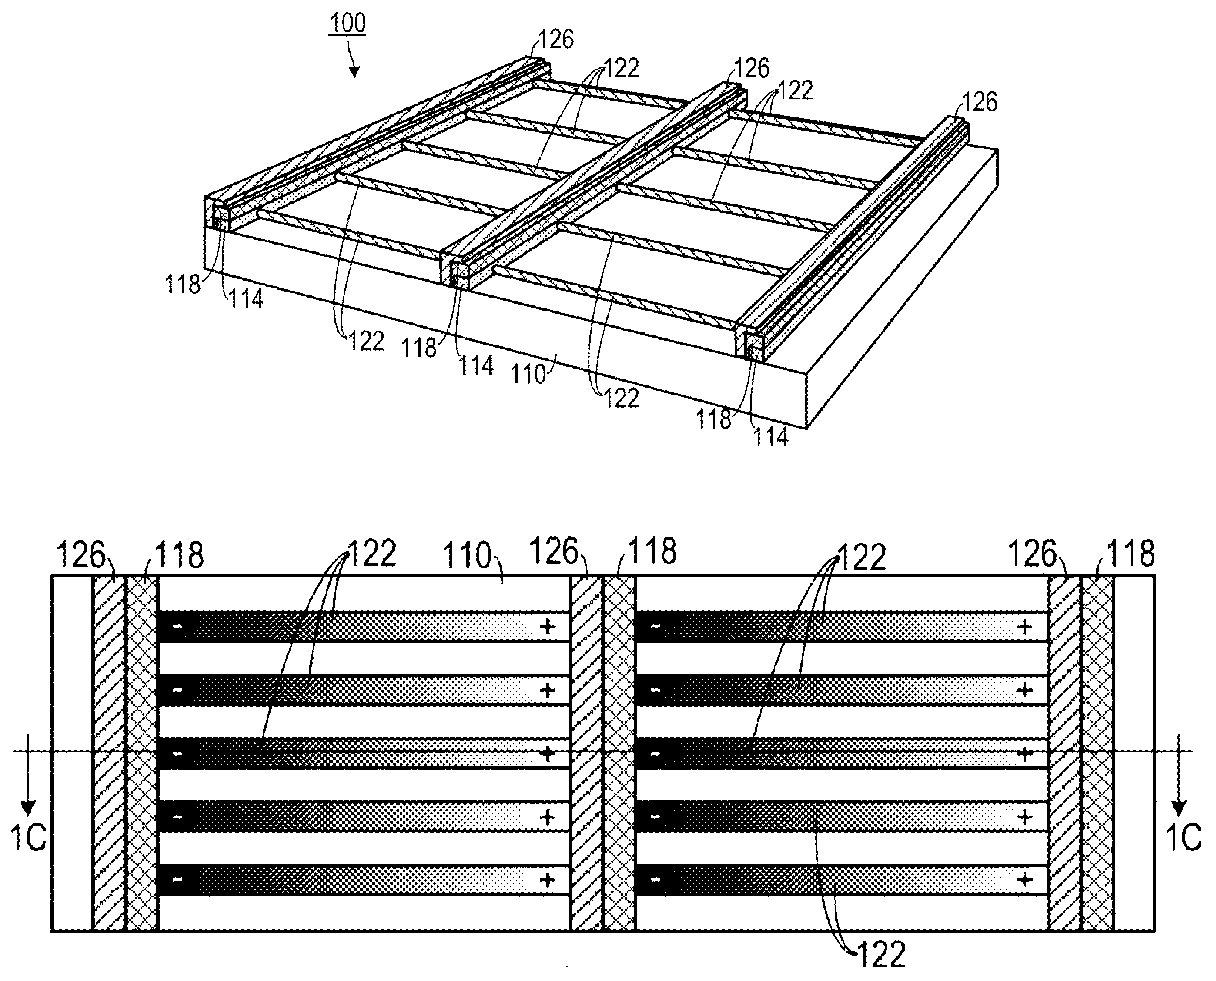 Manufacturing method for nanowire films/bodies accumulated in order